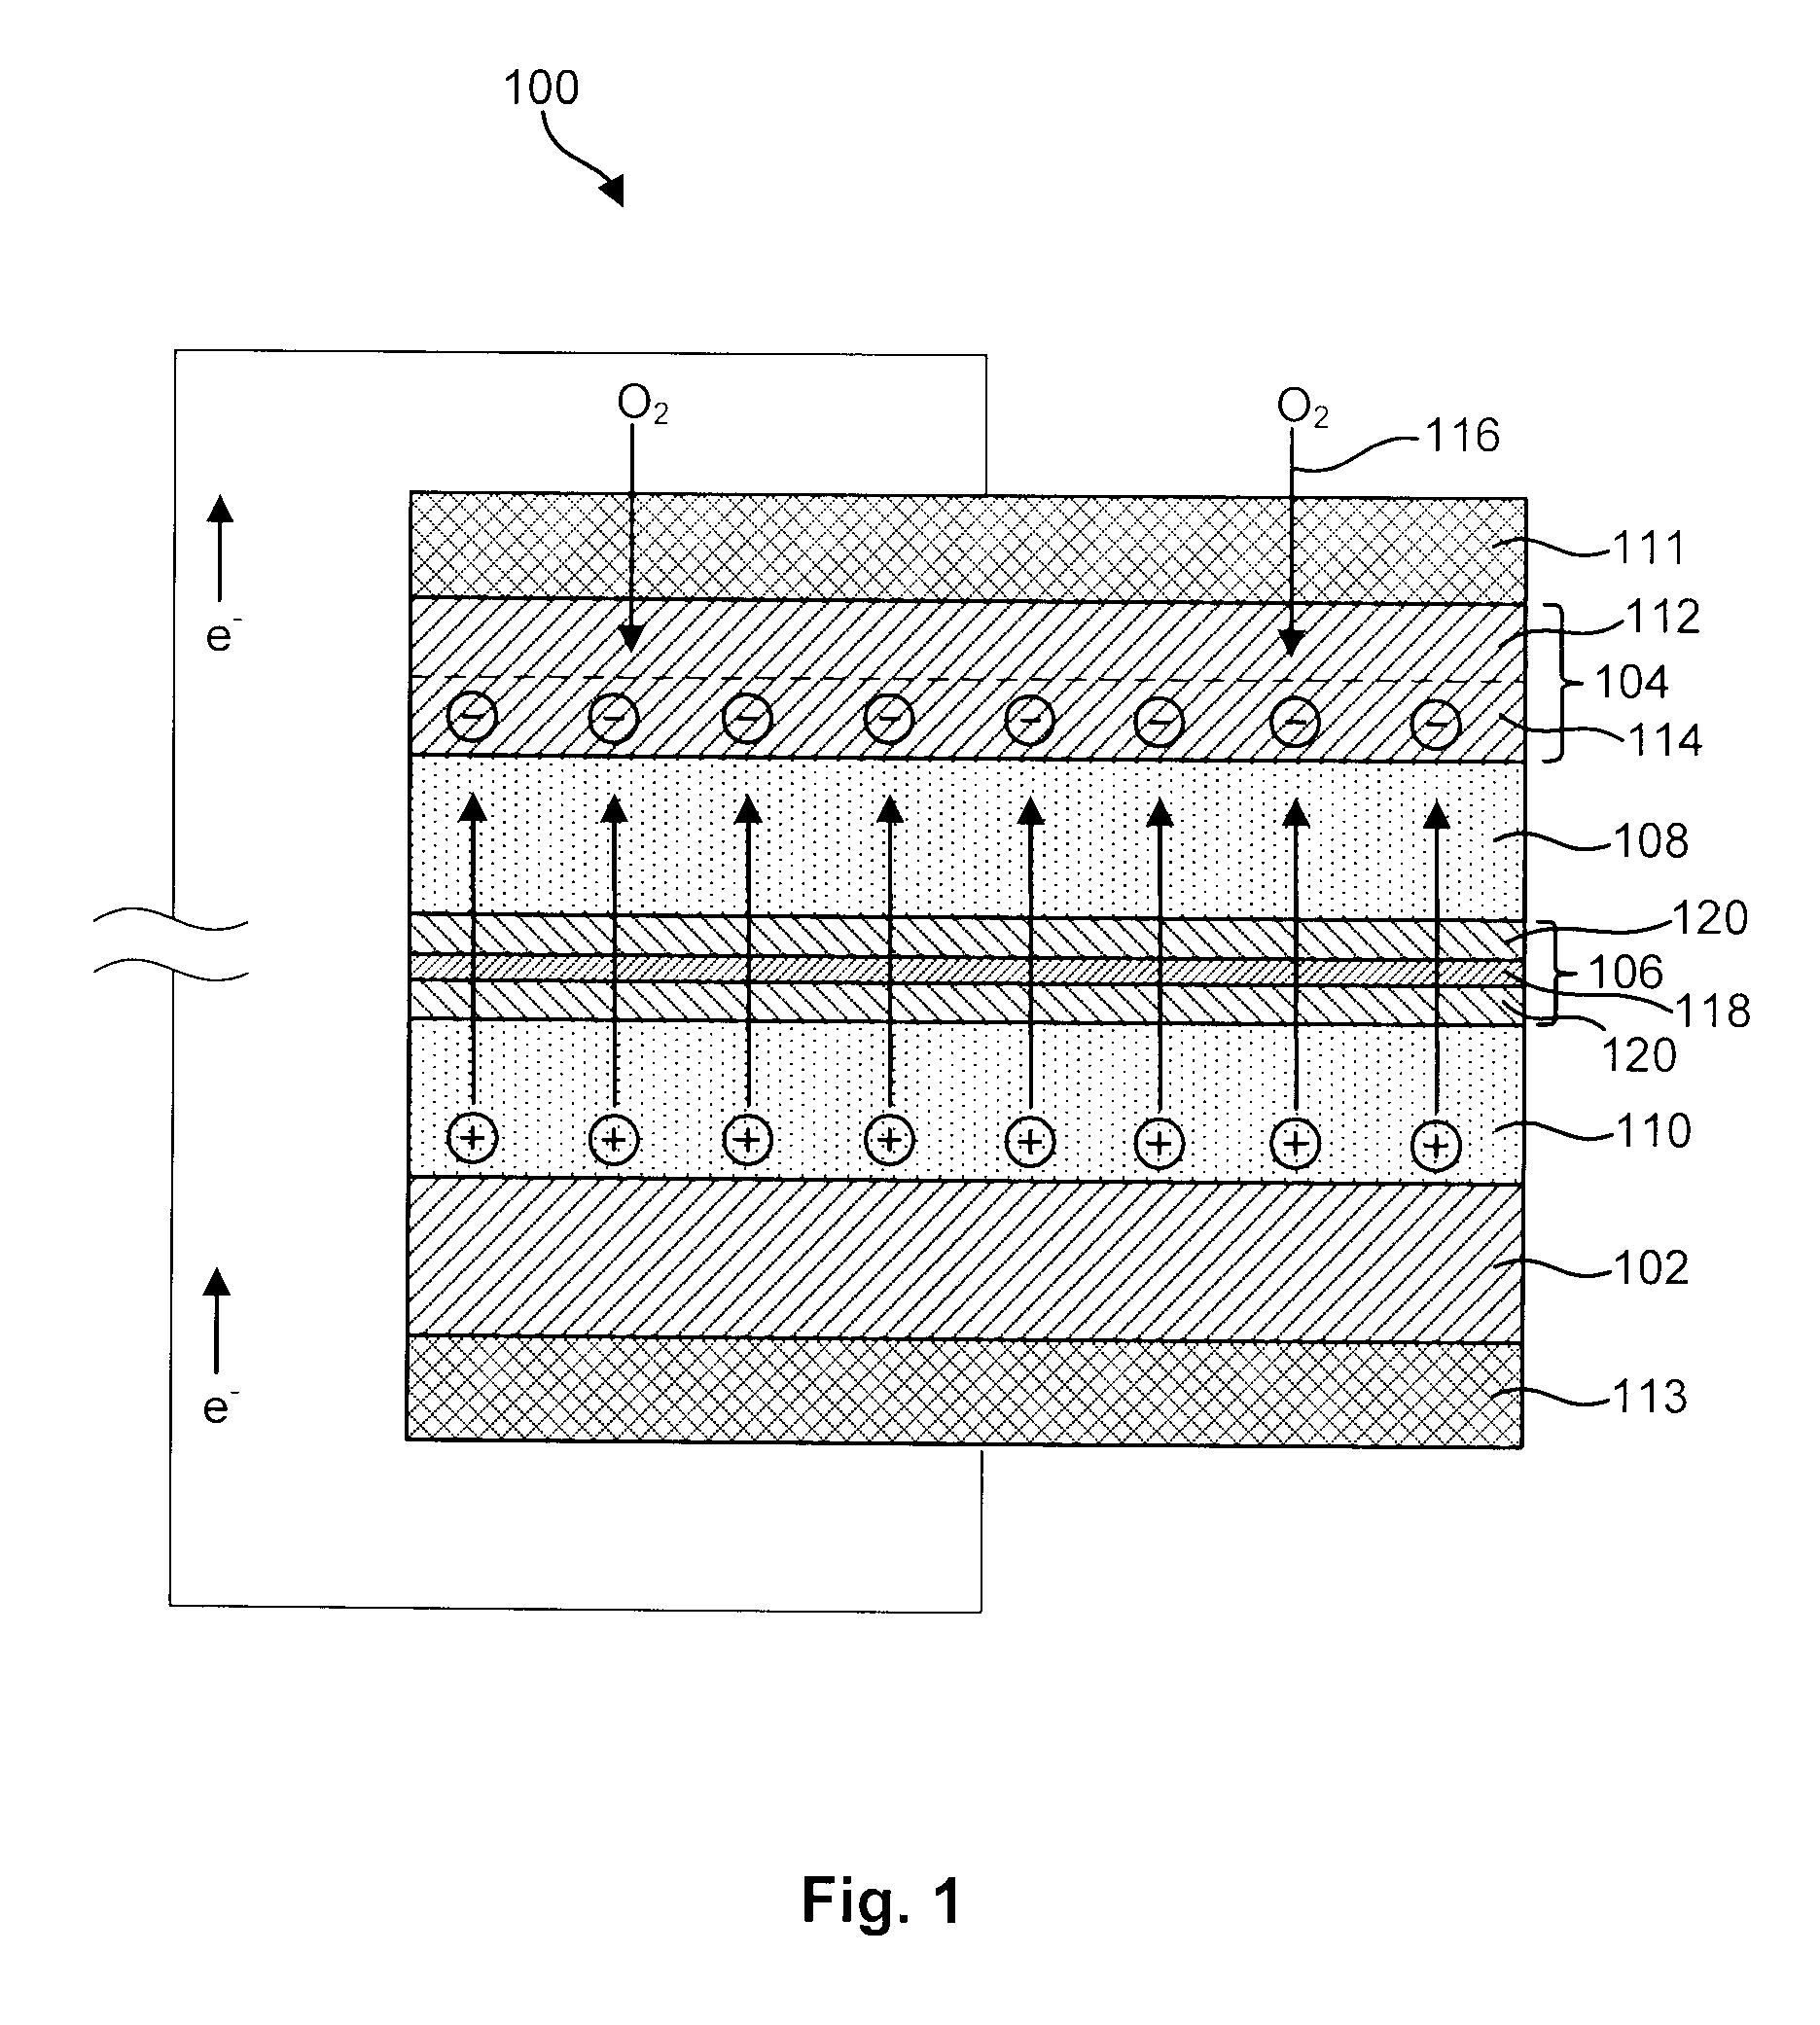 Advanced Metal-Air Battery Having a Ceramic Membrane Electrolyte Background of the Invention